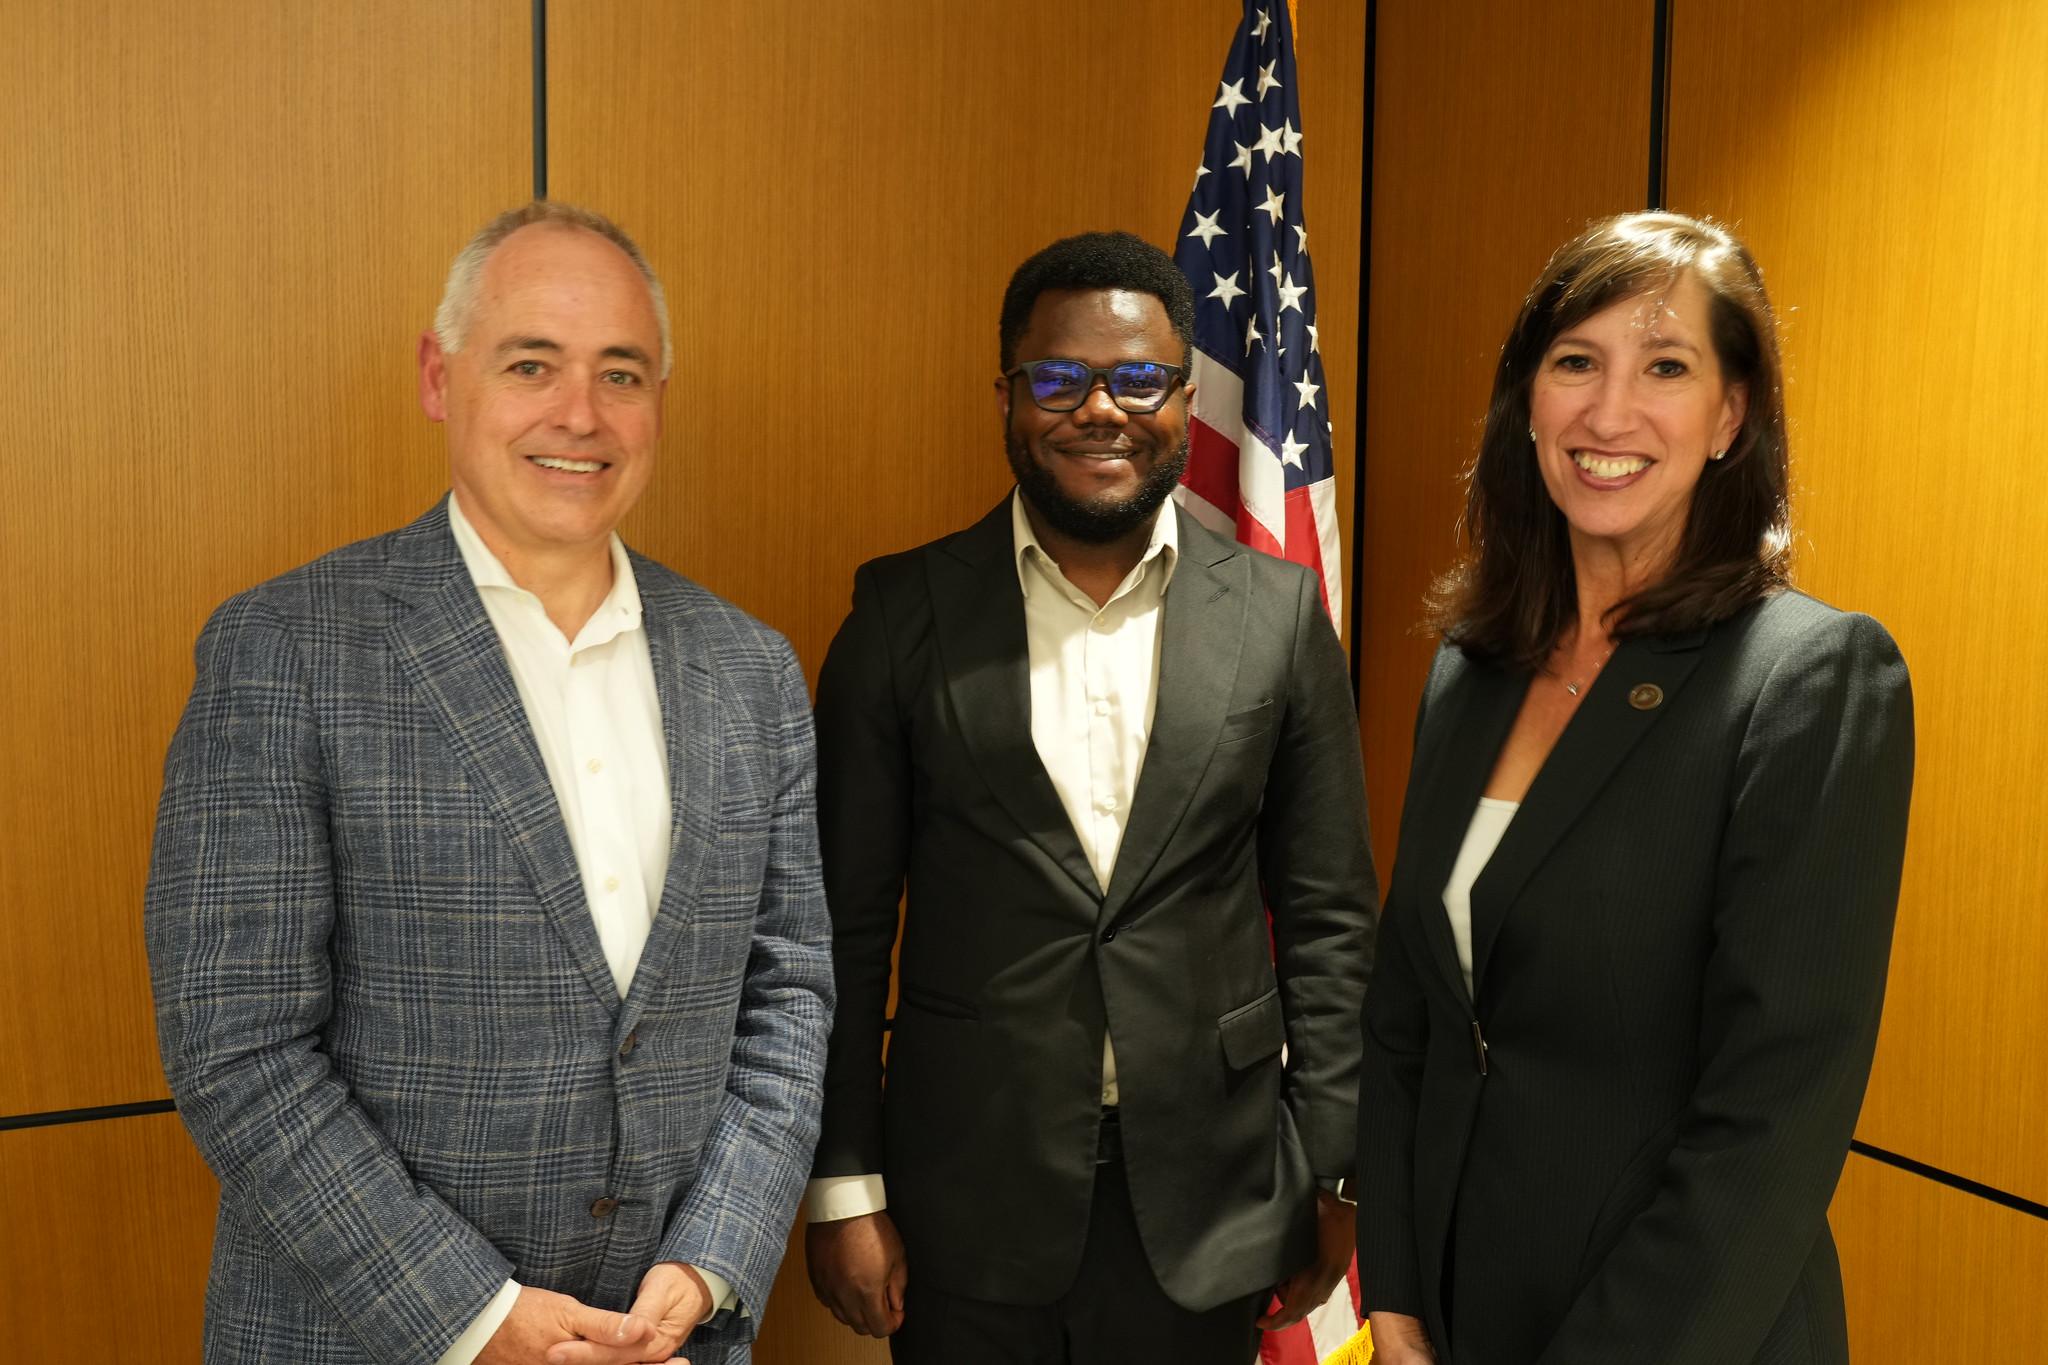 Pictured left-to-right: Georgia Tech President Ángel Cabrera, Daniel Nkemelu, and Carter Center CEO Paige Alexander.